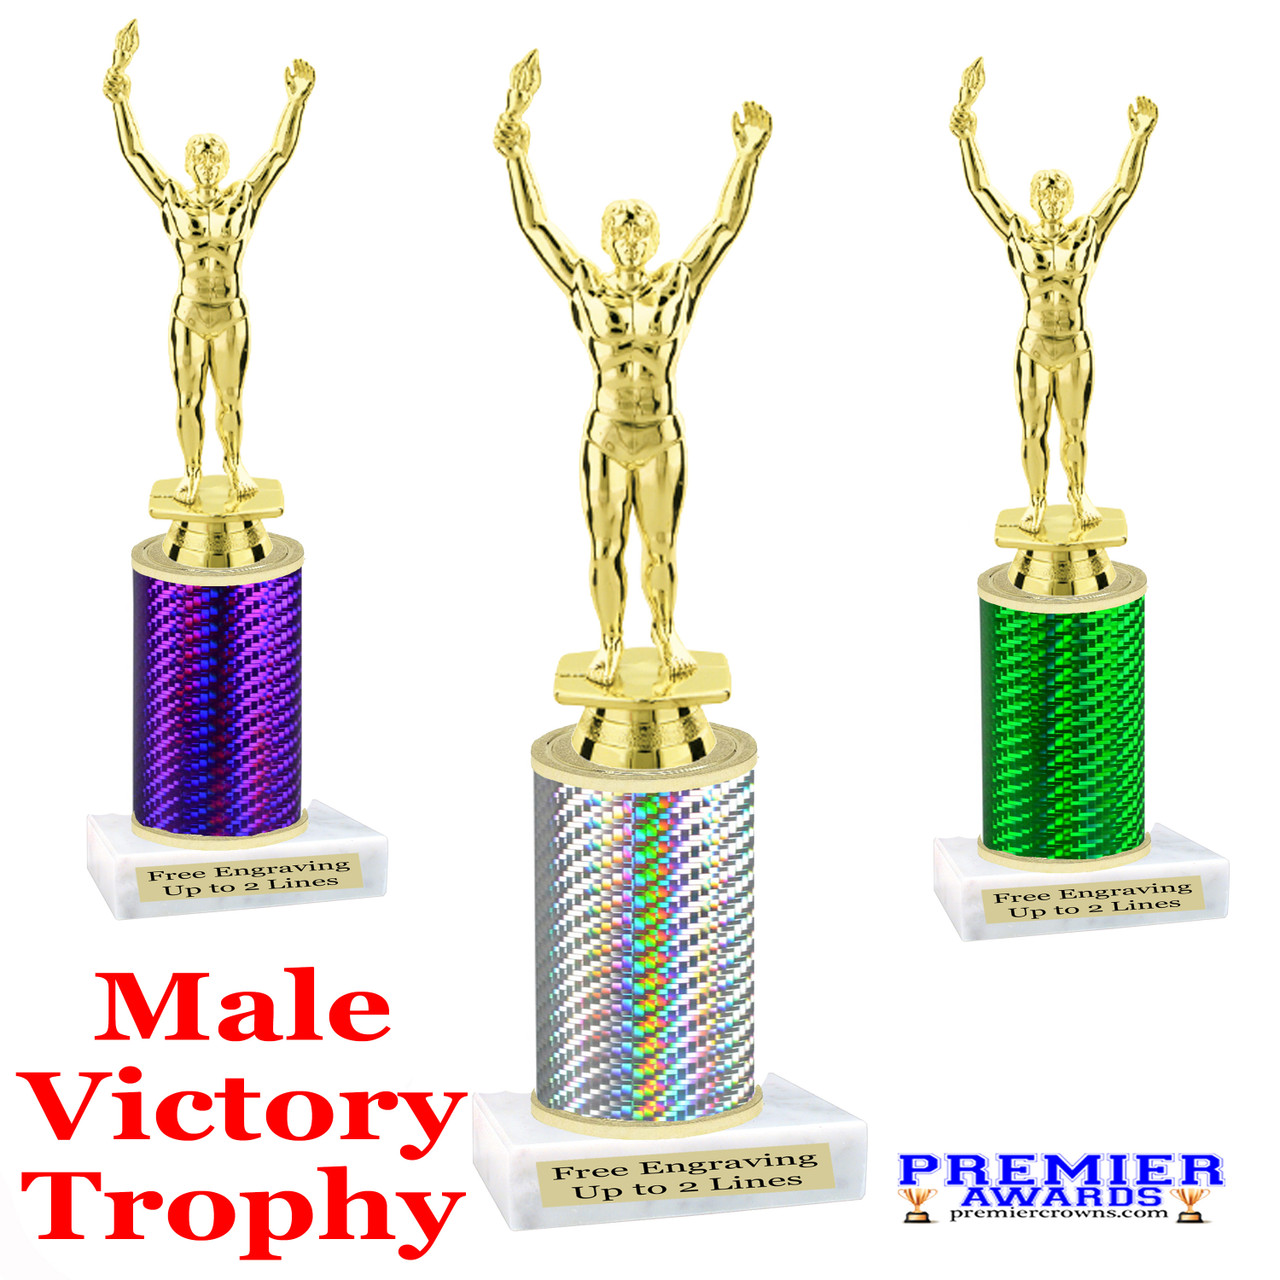 VICTORY TROPHY/AWARD FREE ENGRAVING